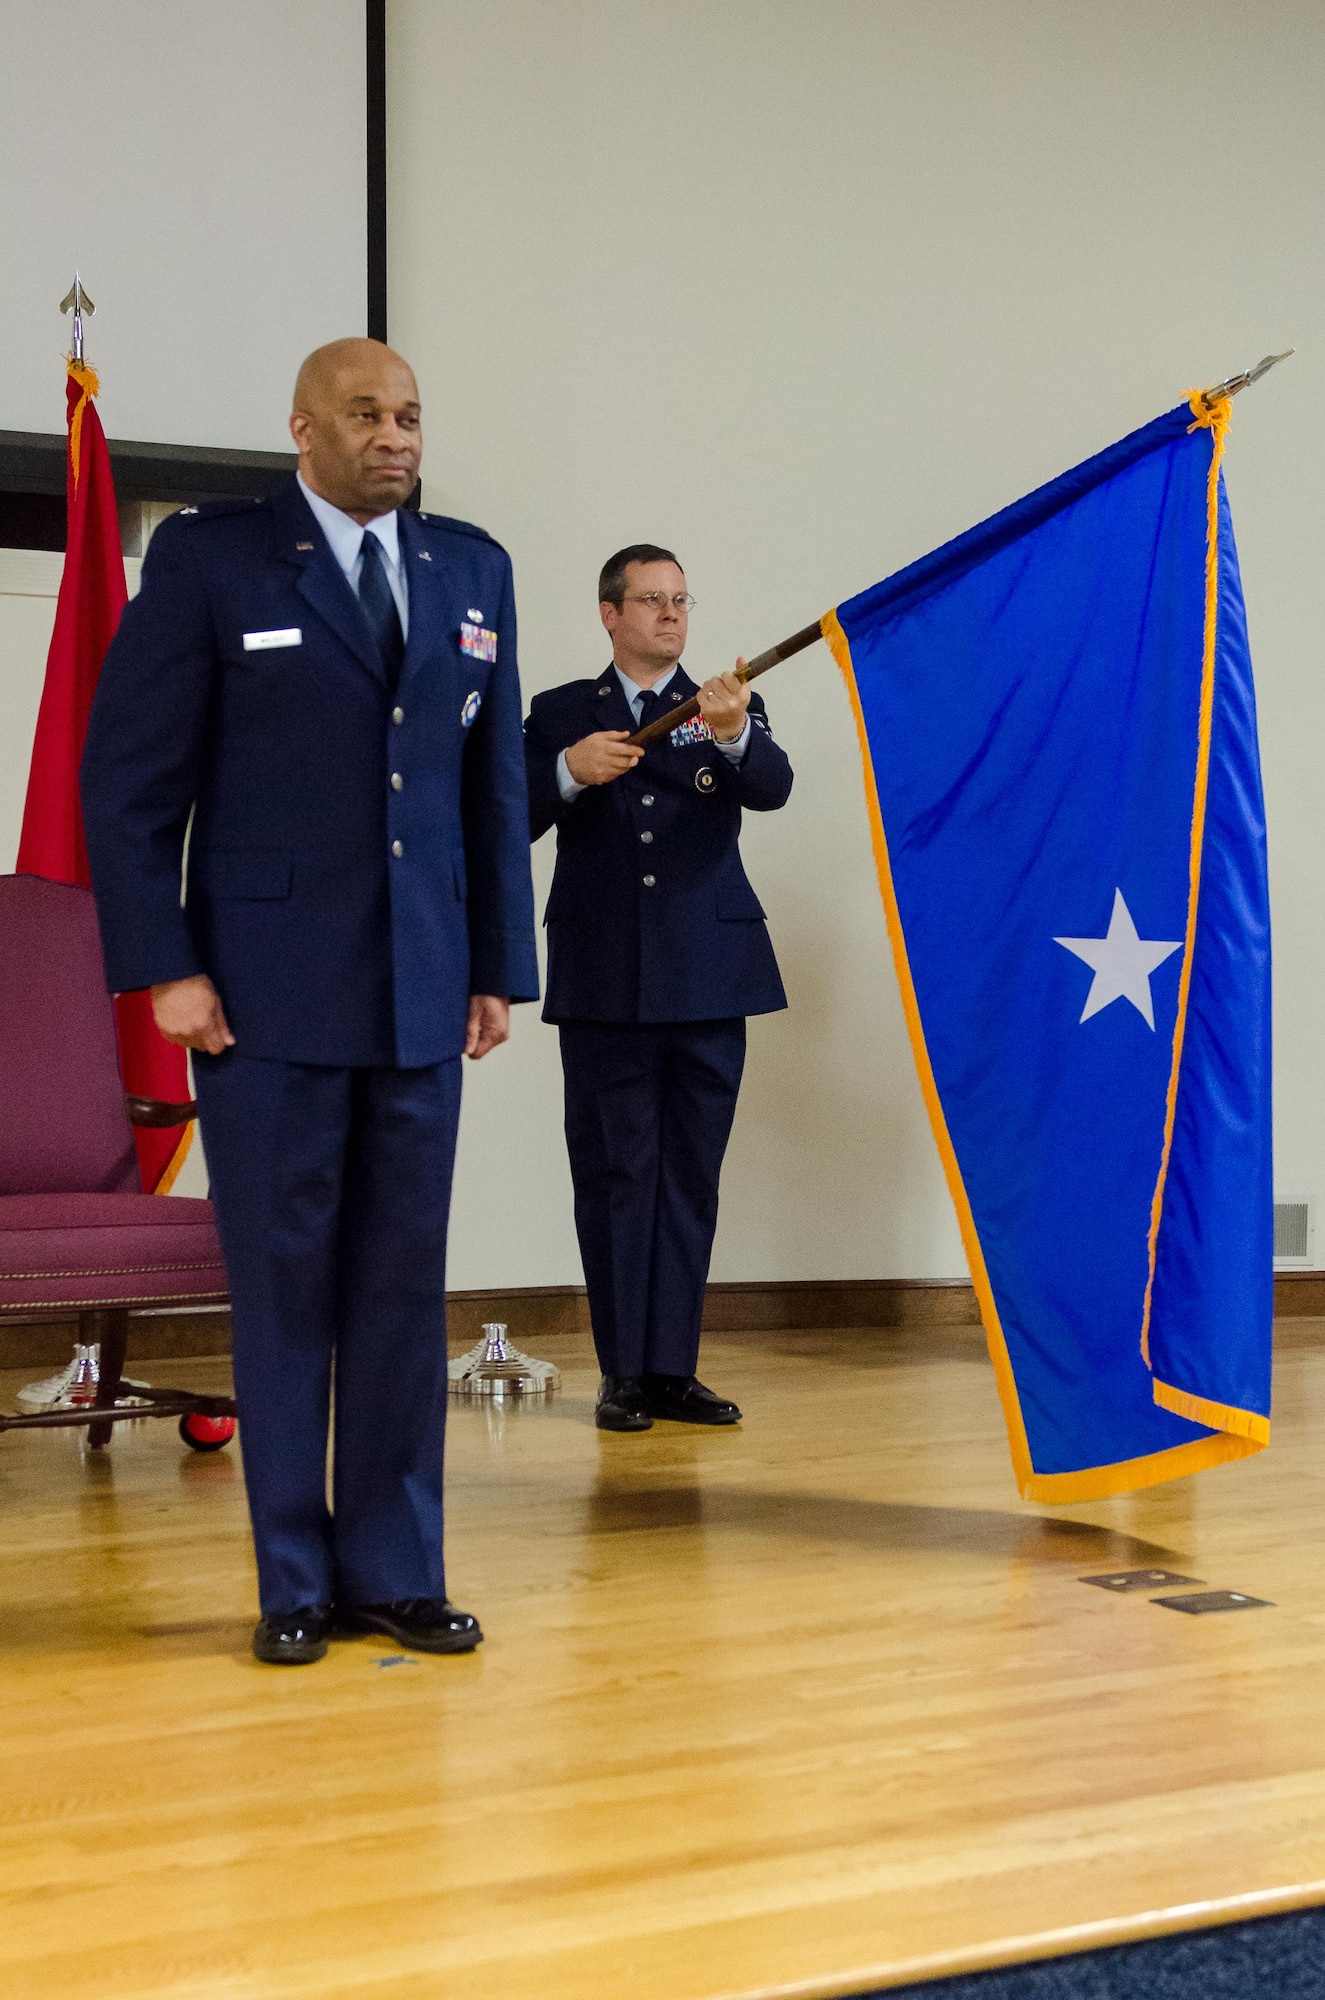 The flag for newly promoted Brig. Gen. Charles M. Walker, chief of staff for Headquarters, Kentucky Air National Guard, is unfurled for the first time during Walker’s promotion ceremony Nov. 4, 2017, at the Kentucky Air National Guard base, Louisville, Ky. (U.S. Air National Guard photo by Tech. Sgt. Vicky Spesard)